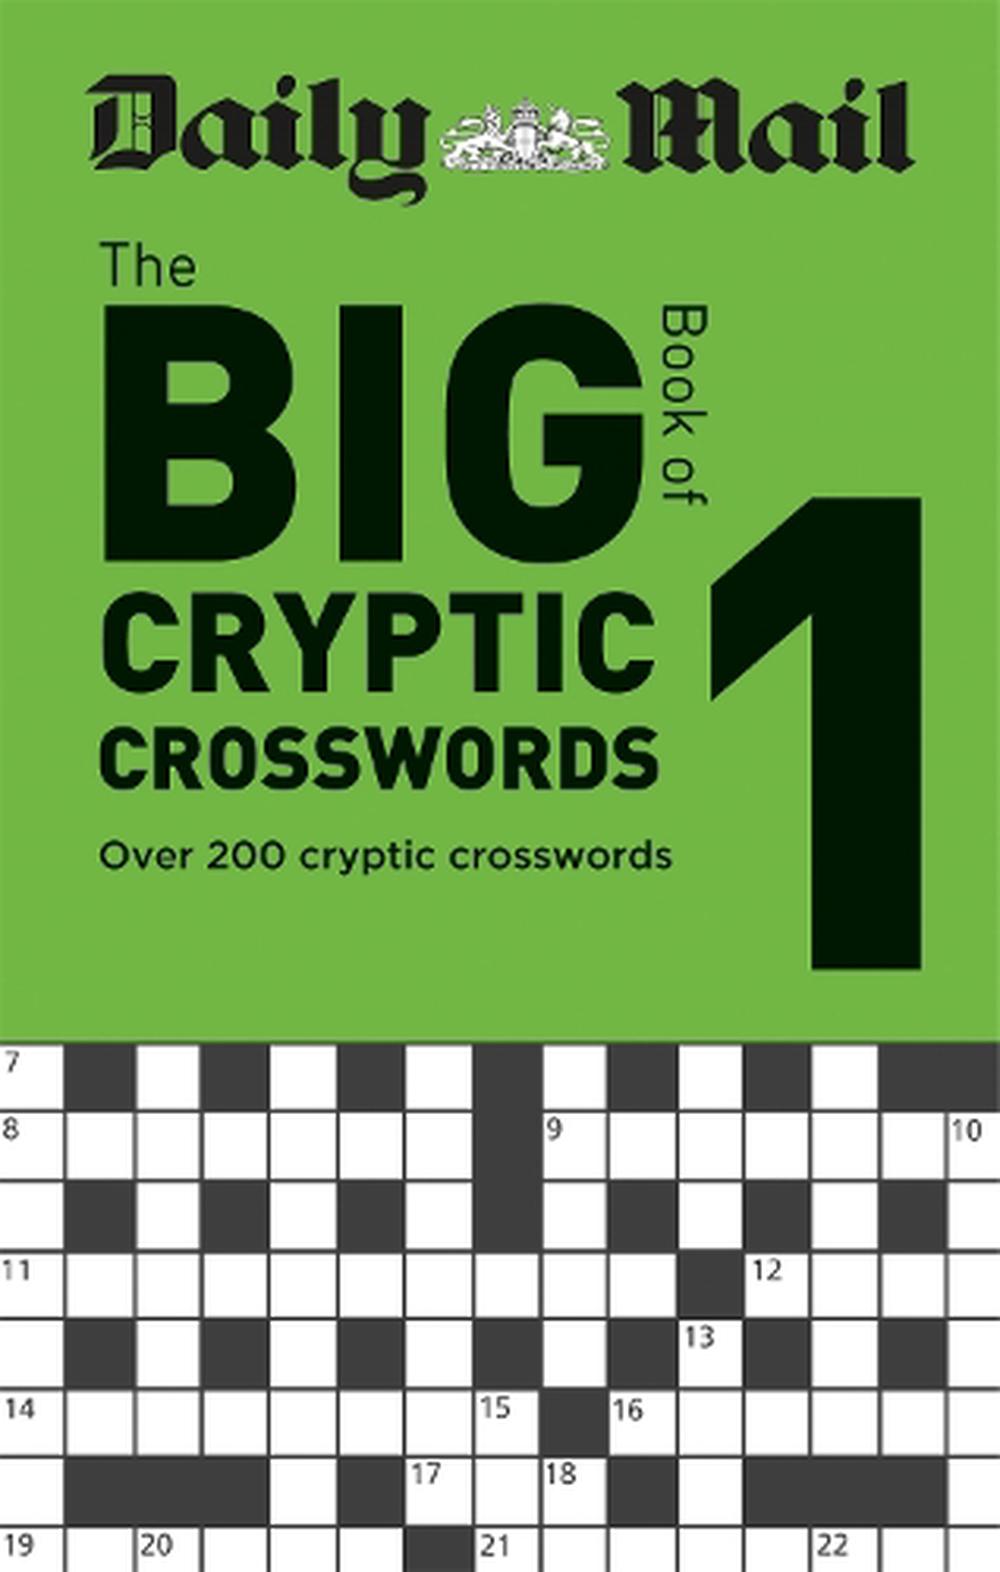 of　The　Big　9780600636304　Buy　Mail,　at　Daily　Mail　by　Crosswords　Daily　online　Book　Paperback,　Volume　Cryptic　Nile